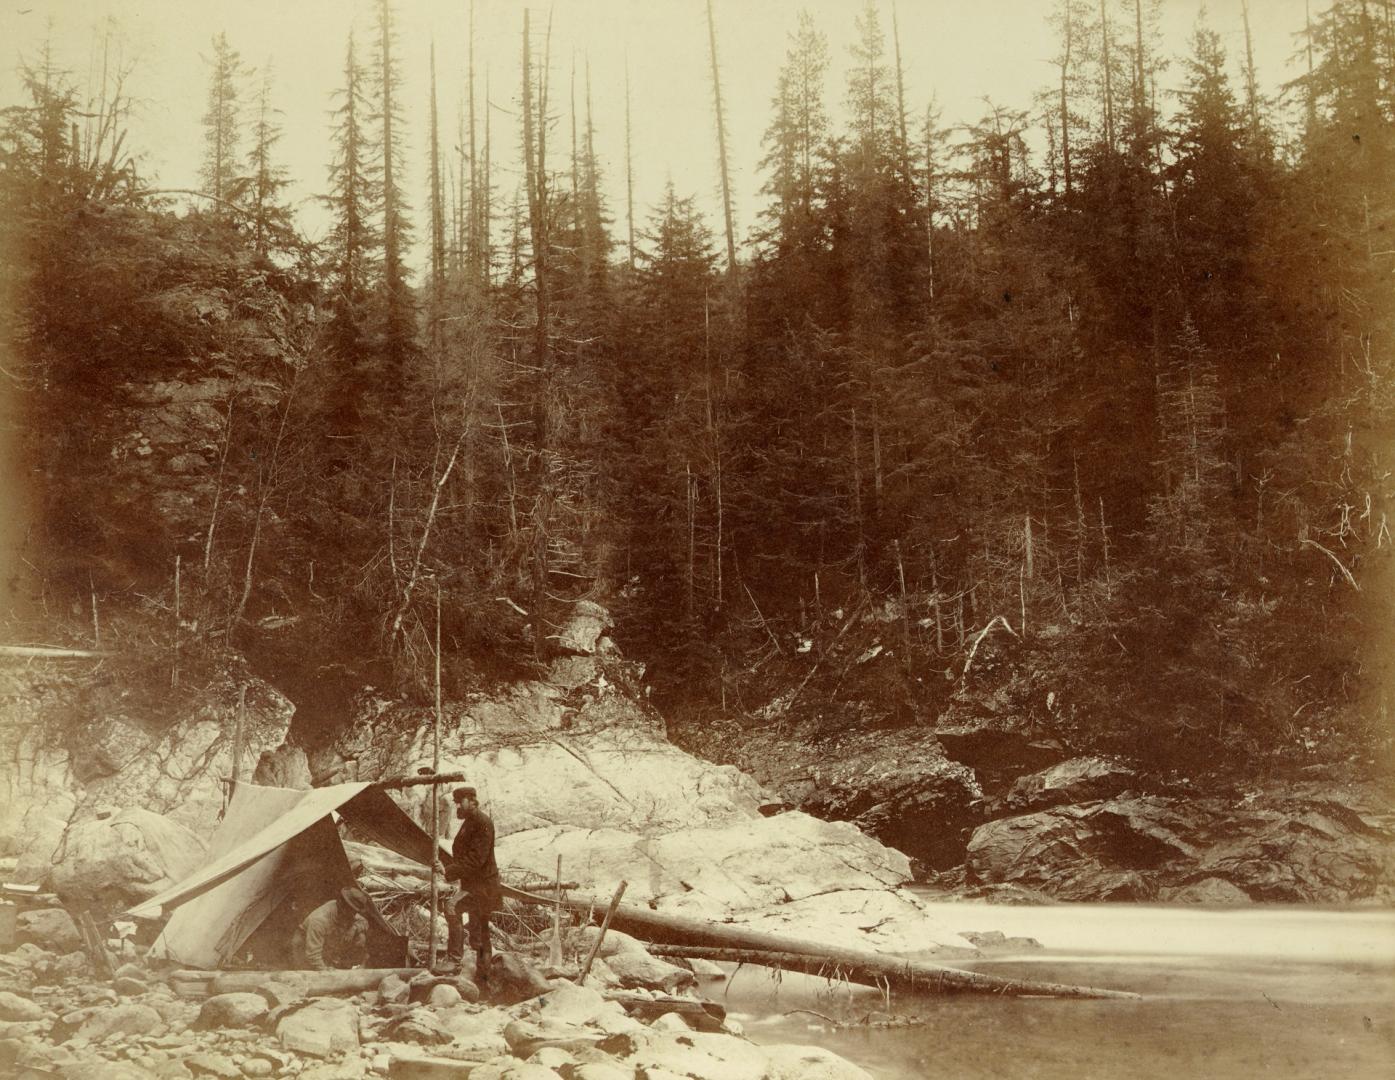 Photographer's tent at the Lower Gate of Murchison's Rapids, November 8-9